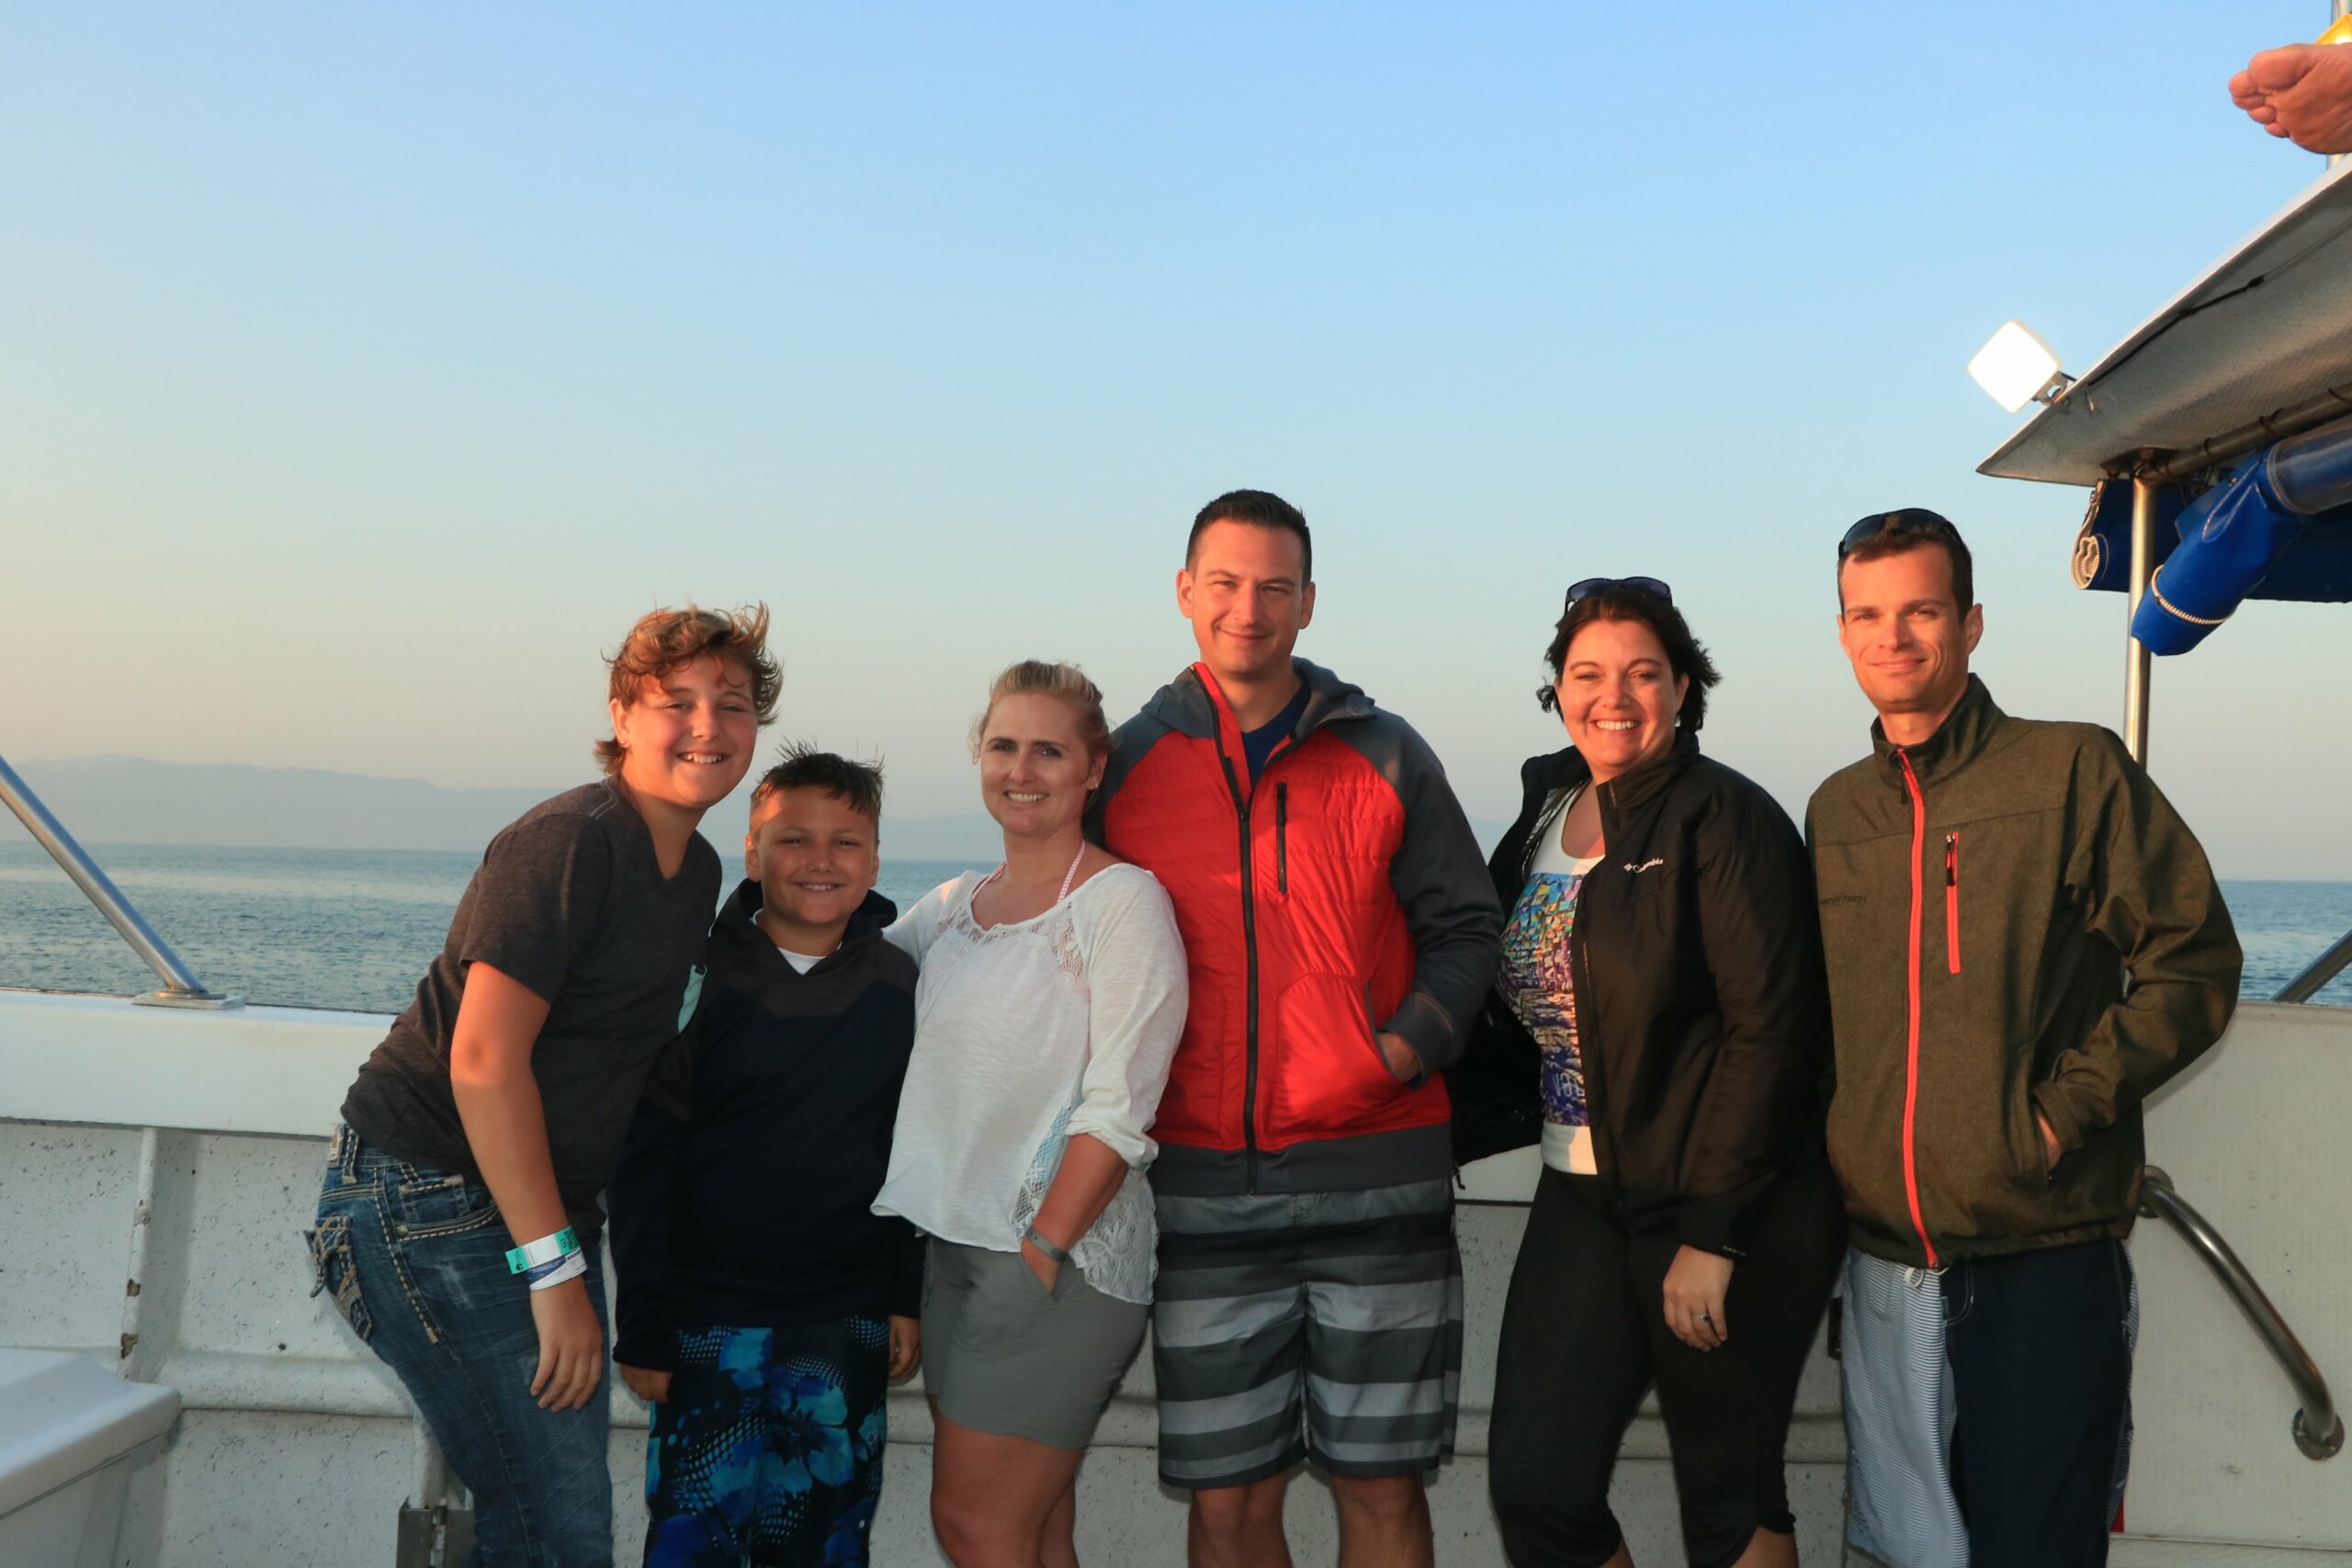 Awaken travels agent cindi sanden stands on a boat with her family and friends in Mexico